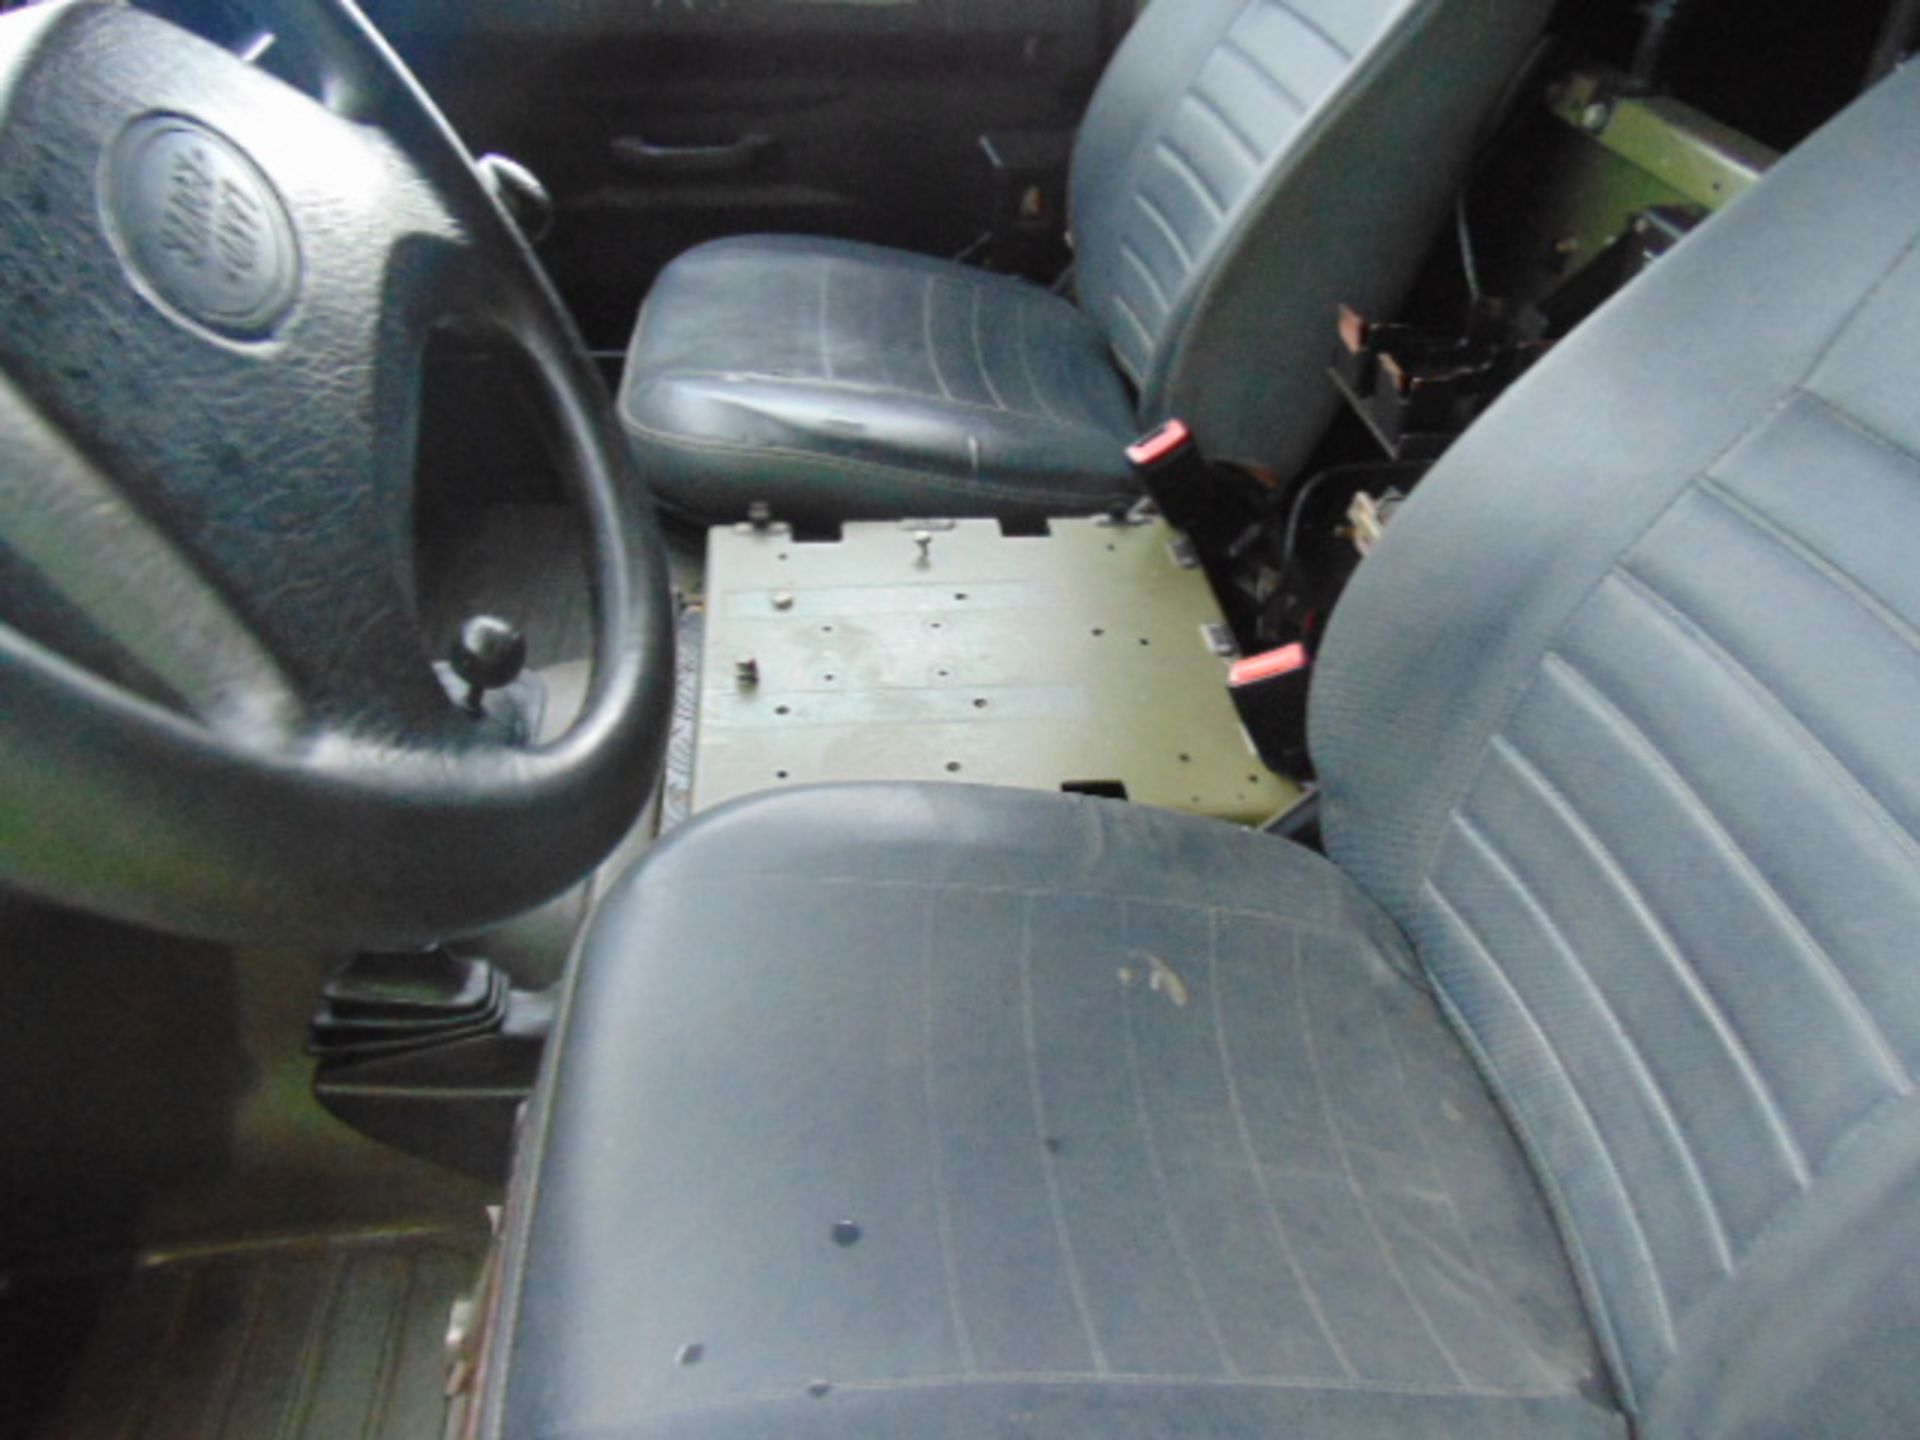 Military Specification Land Rover Wolf 110 Hard Top Left Hand Drive - Image 20 of 25